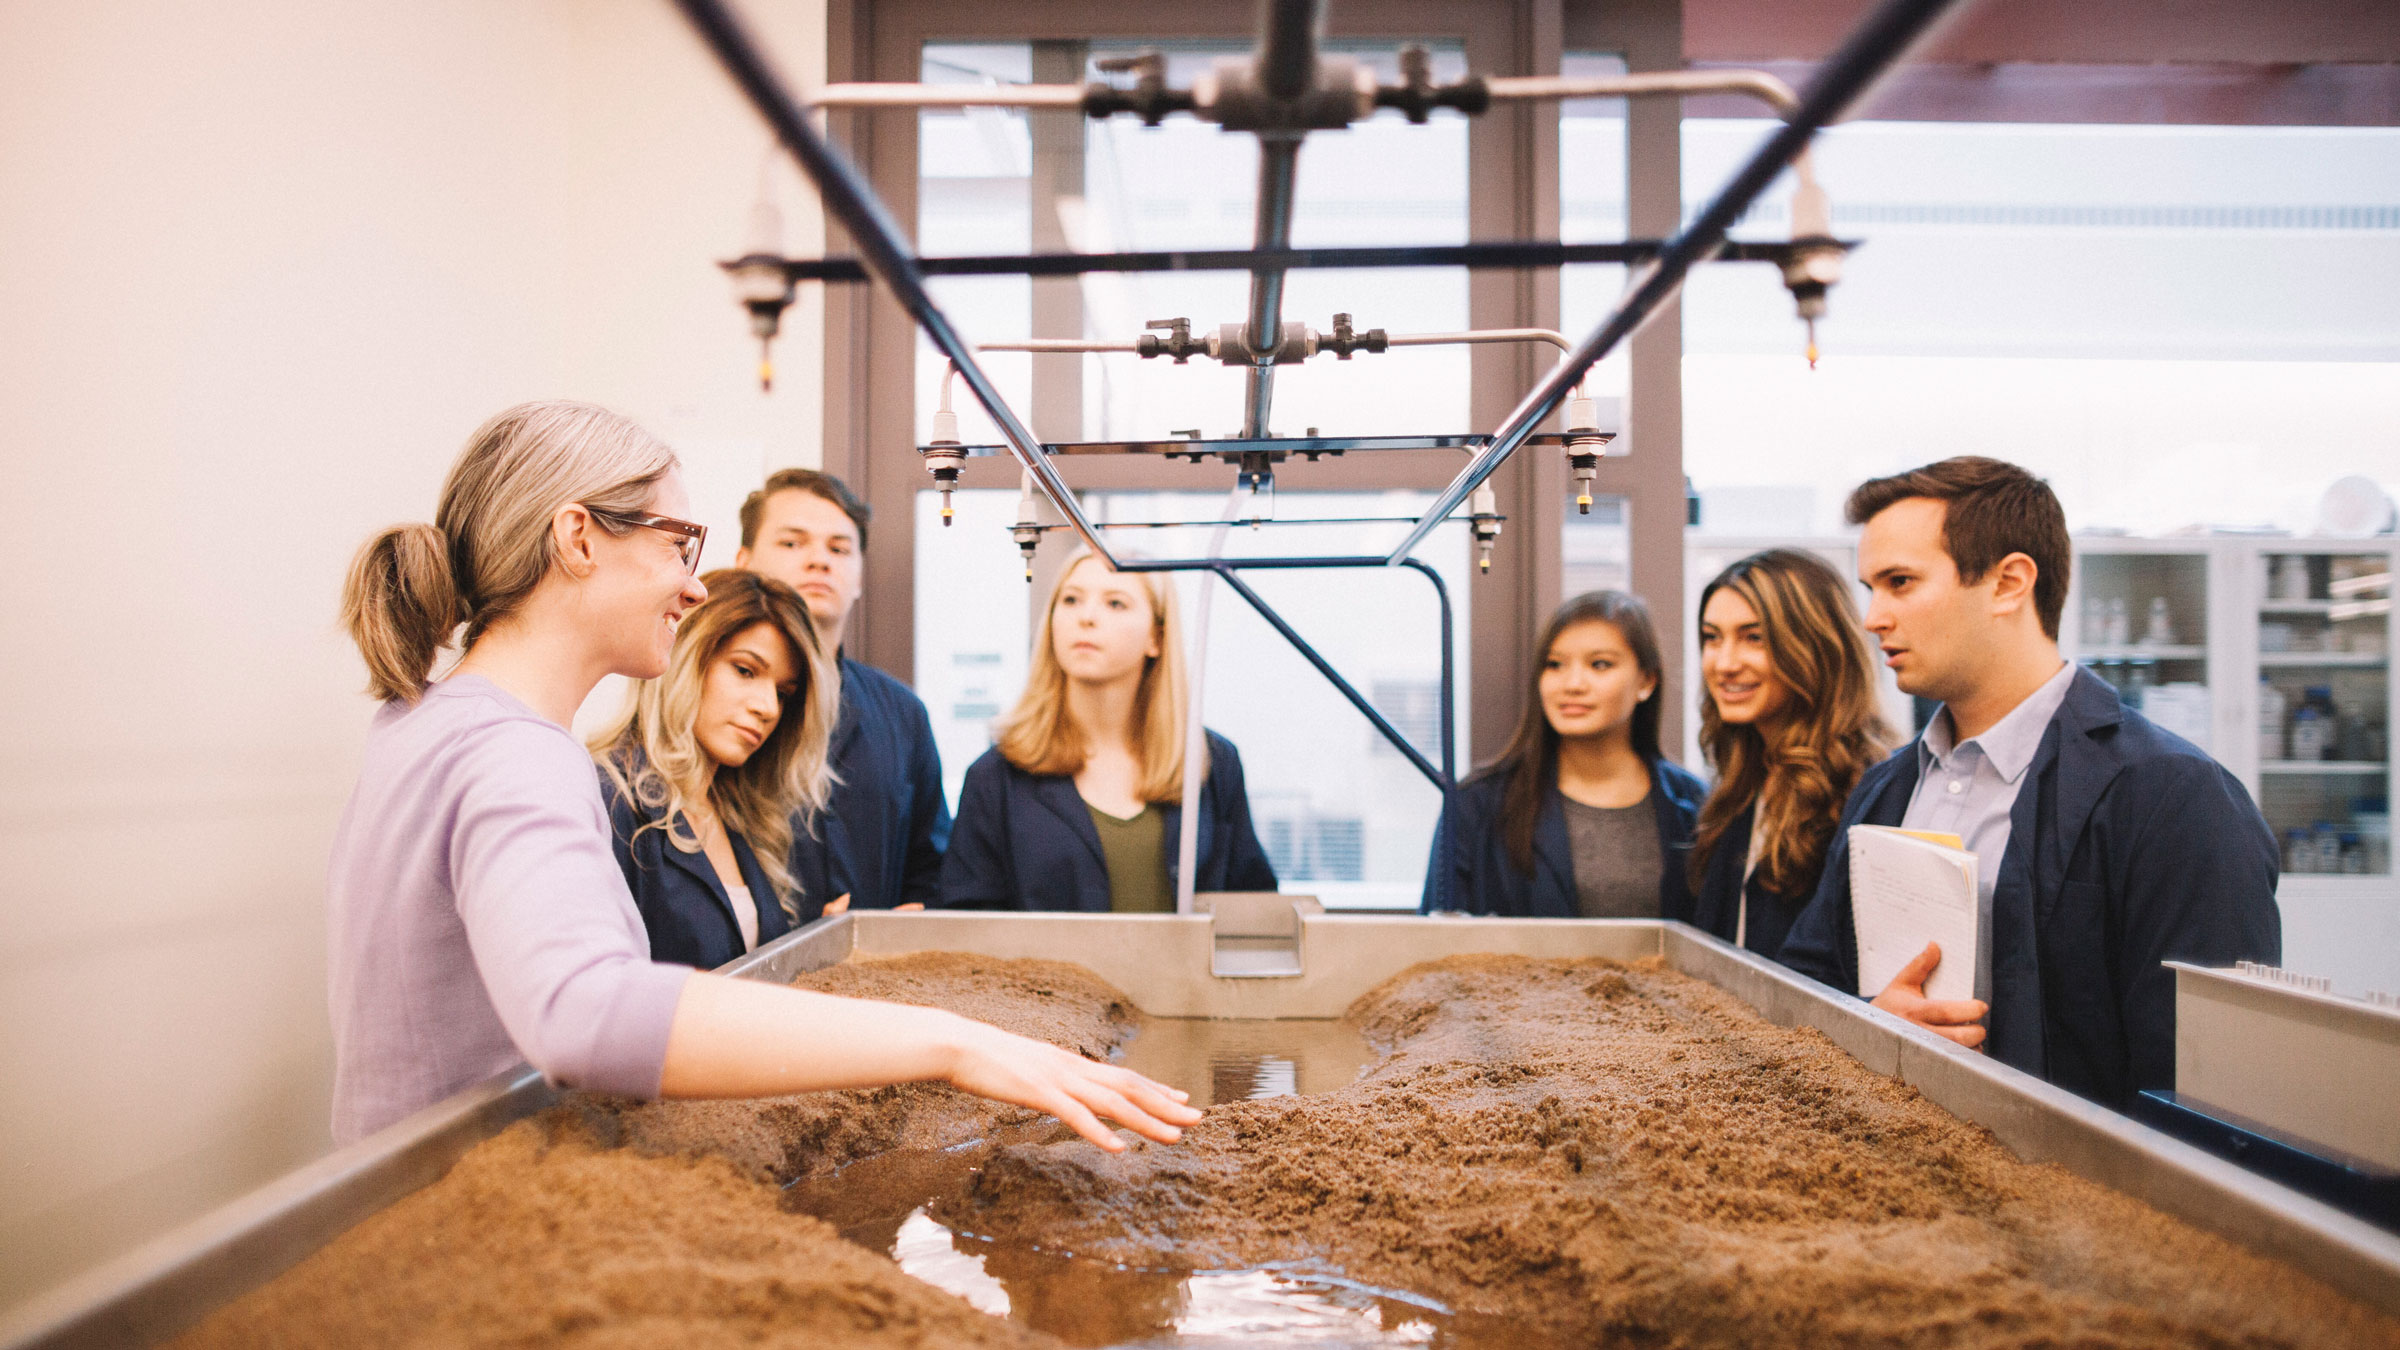 Kimberly DiGiovanni, professor of engineering, talks about civil engineering with students in a soil simulation lab